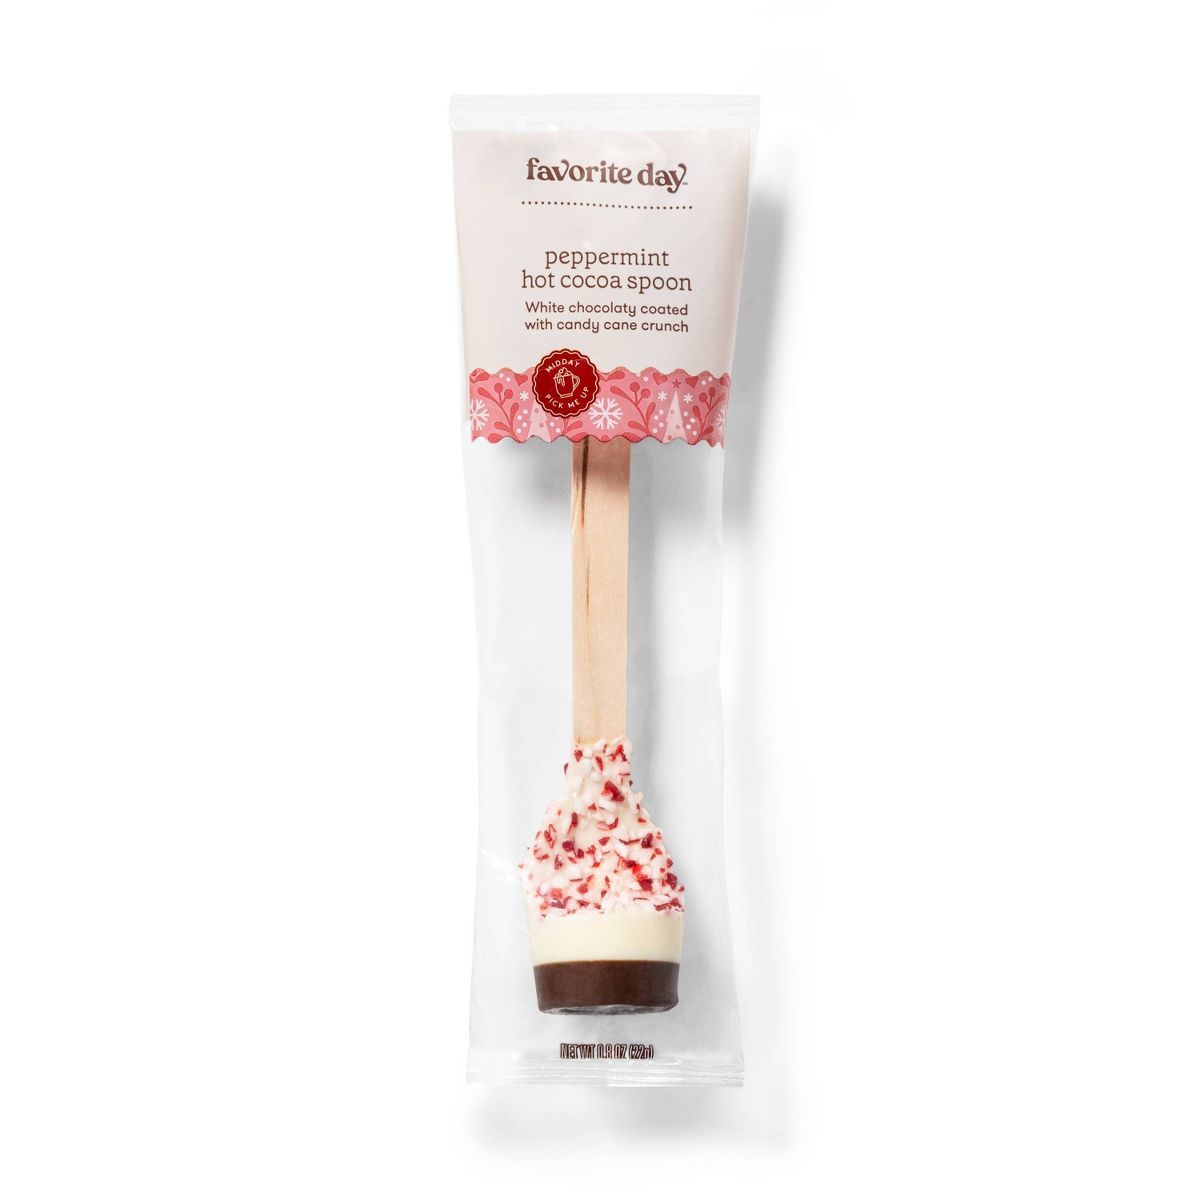 Holiday White Chocolaty Coated with Peppermint Hot Cocoa Spoon - 0.8oz - Favorite Day™ | Target